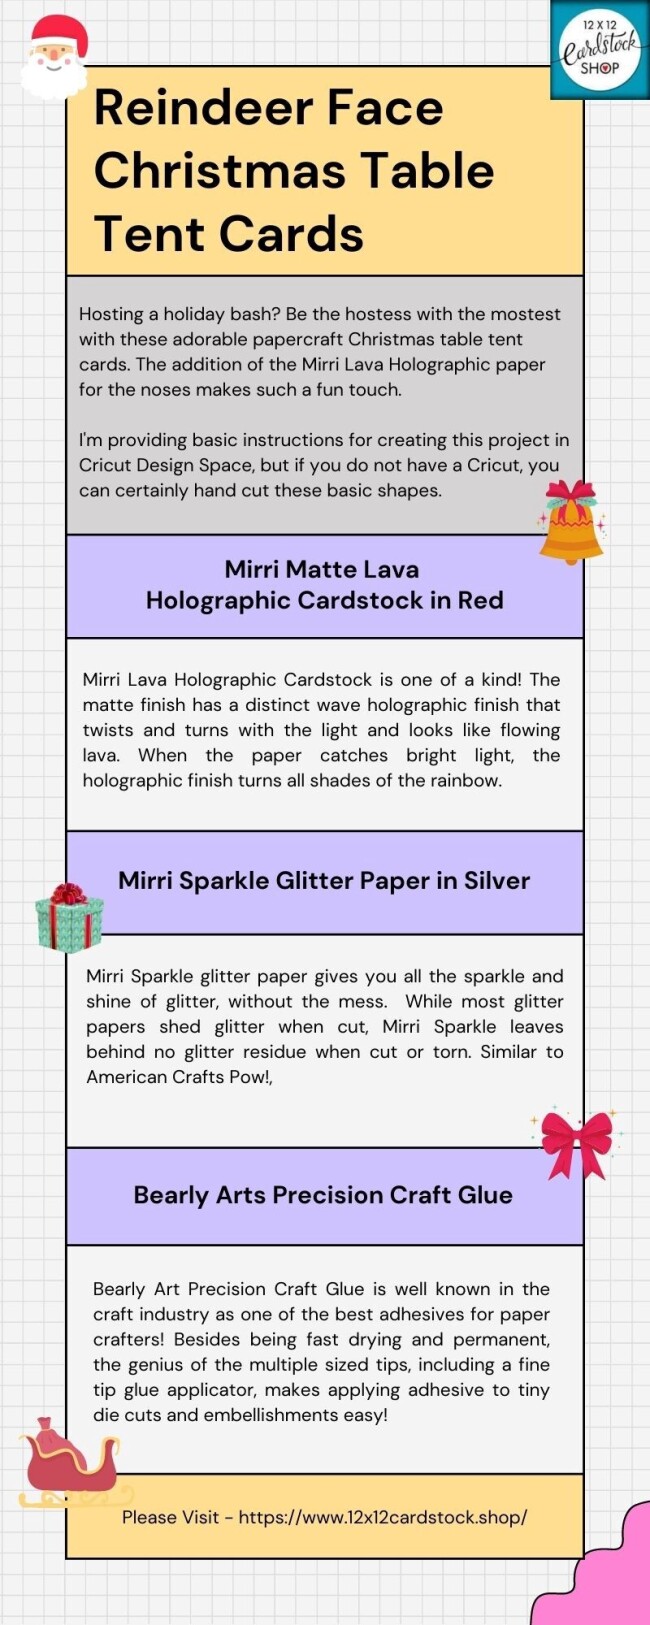 Hosting a holiday bash? Be the hostess with the mostest with these adorable papercraft Christmas table tent cards. The addition of the Mirri Lava Holographic paper for the noses makes such a fun touch. https://www.12x12cardstock.shop/